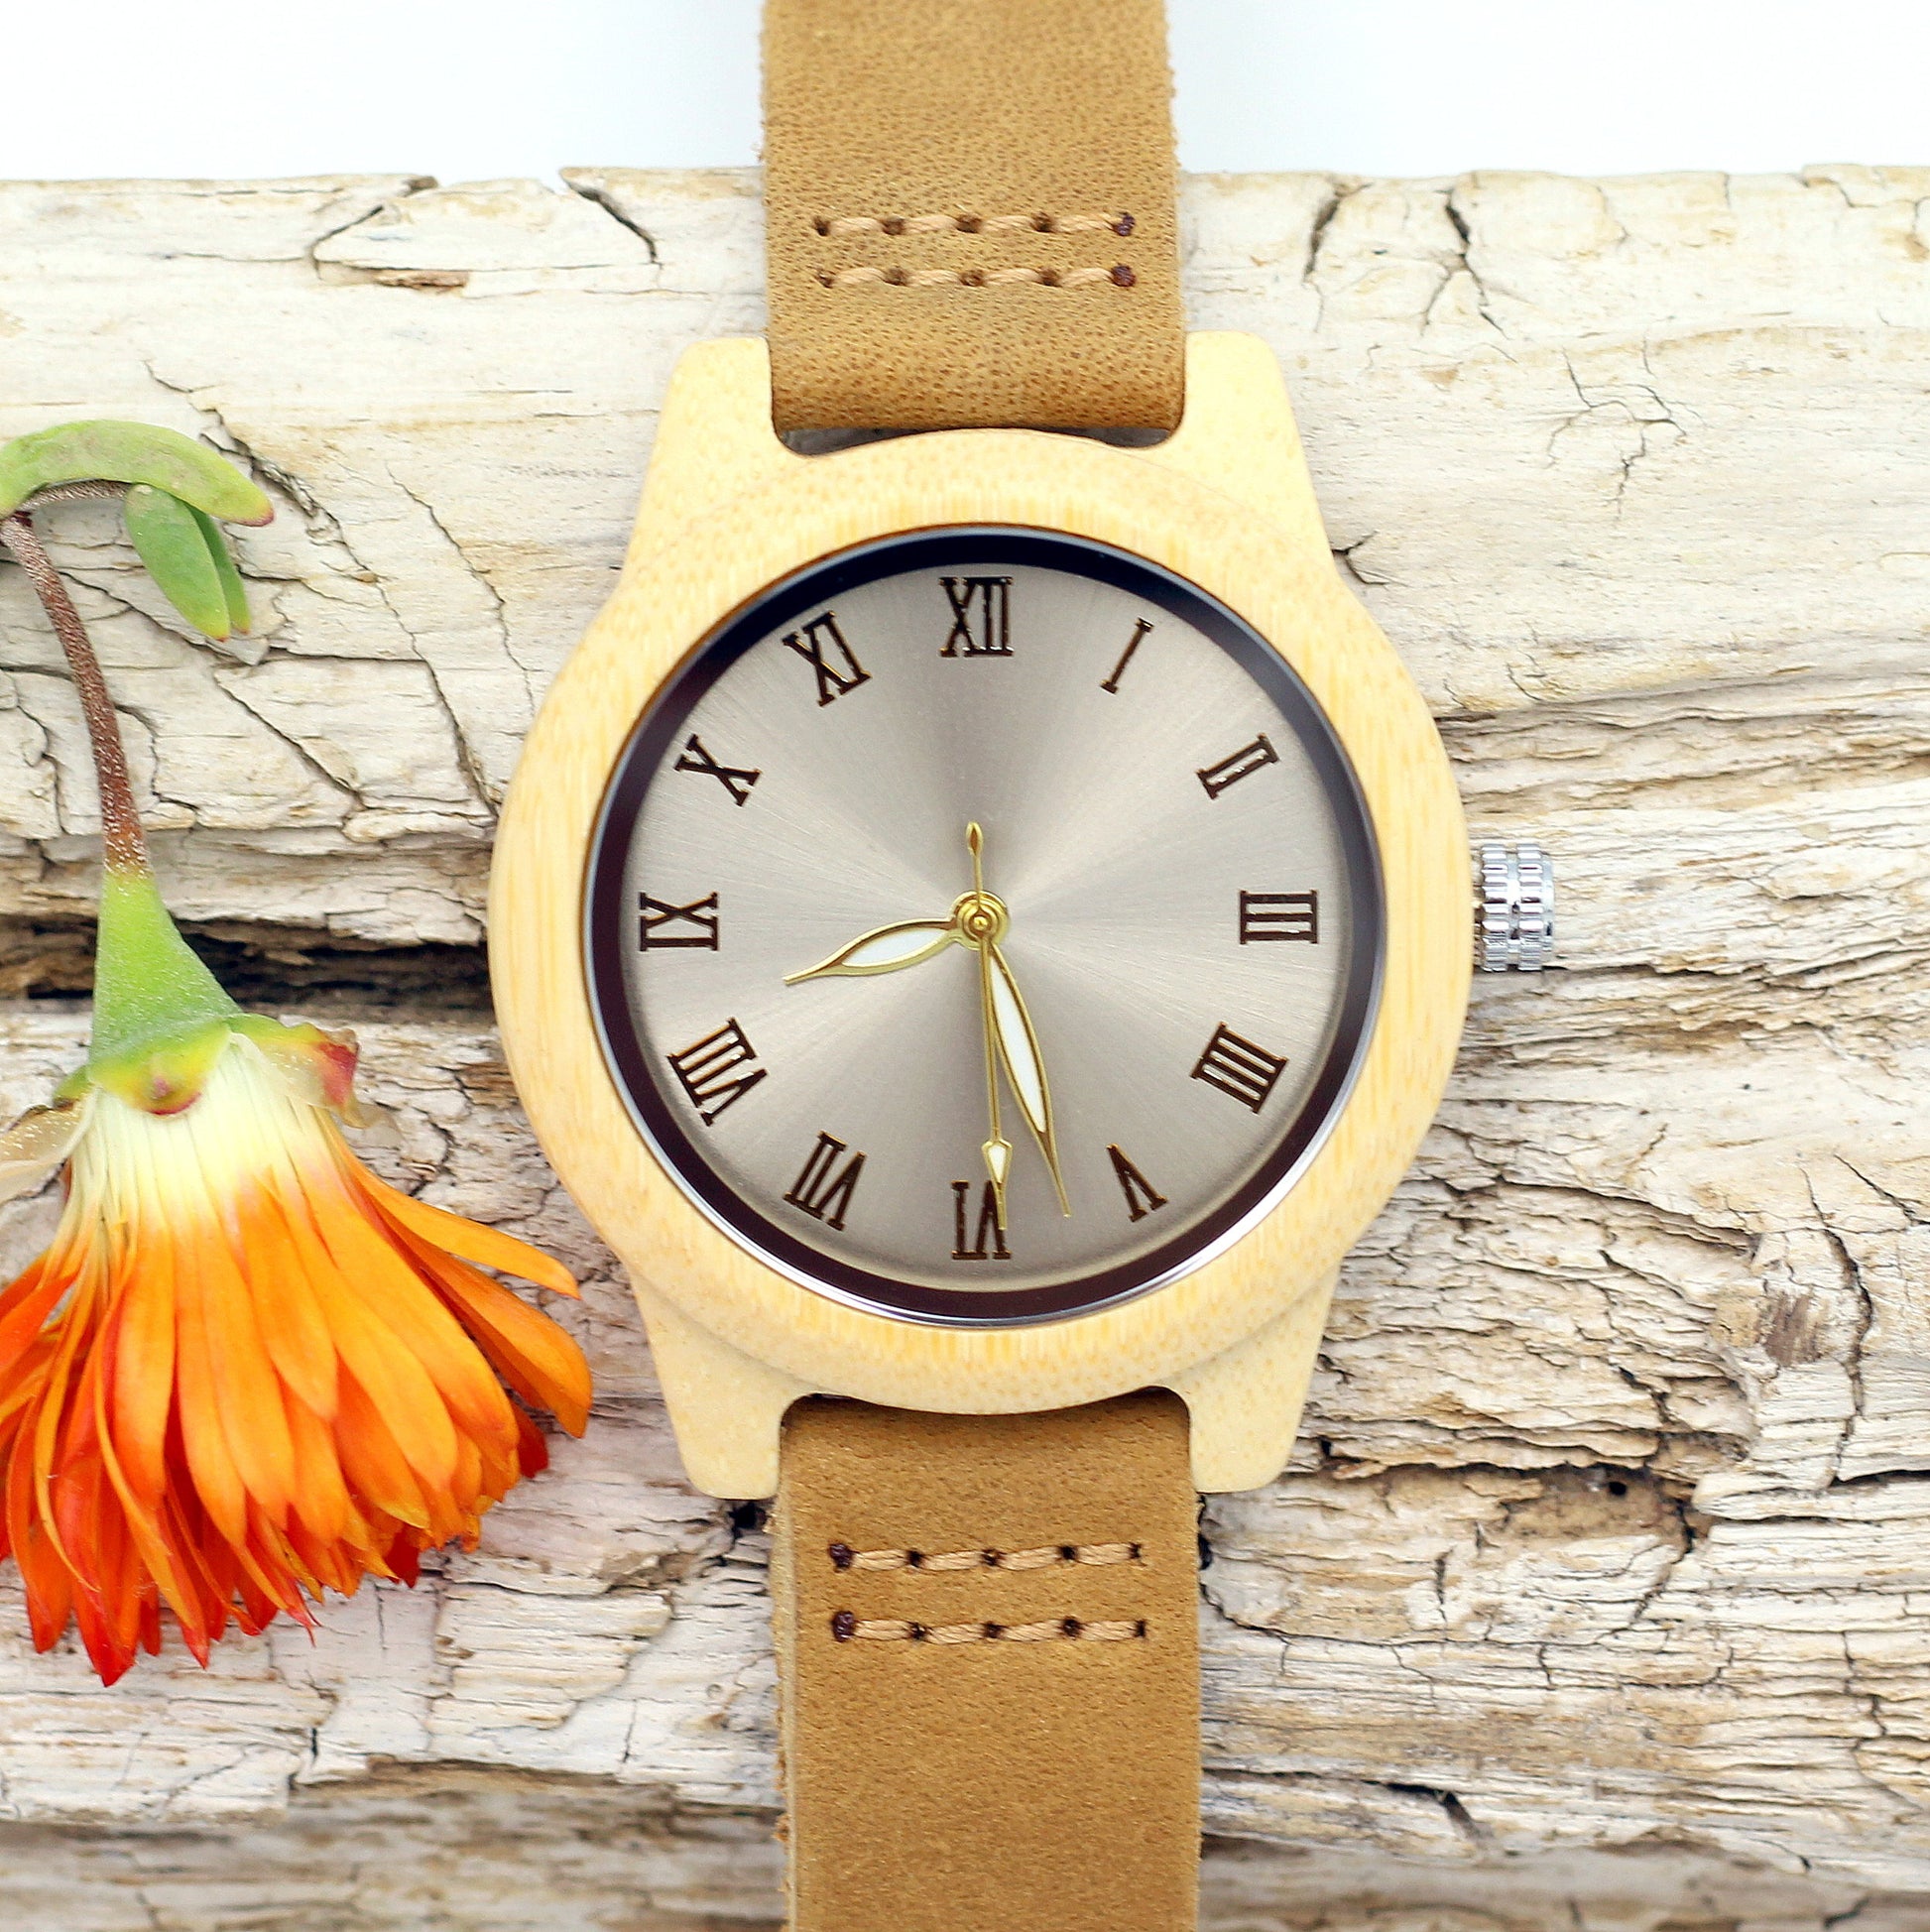 LADY PARIS Wooden Watch Bamboo with Tan Leather Strap - Hashtag Bamboo